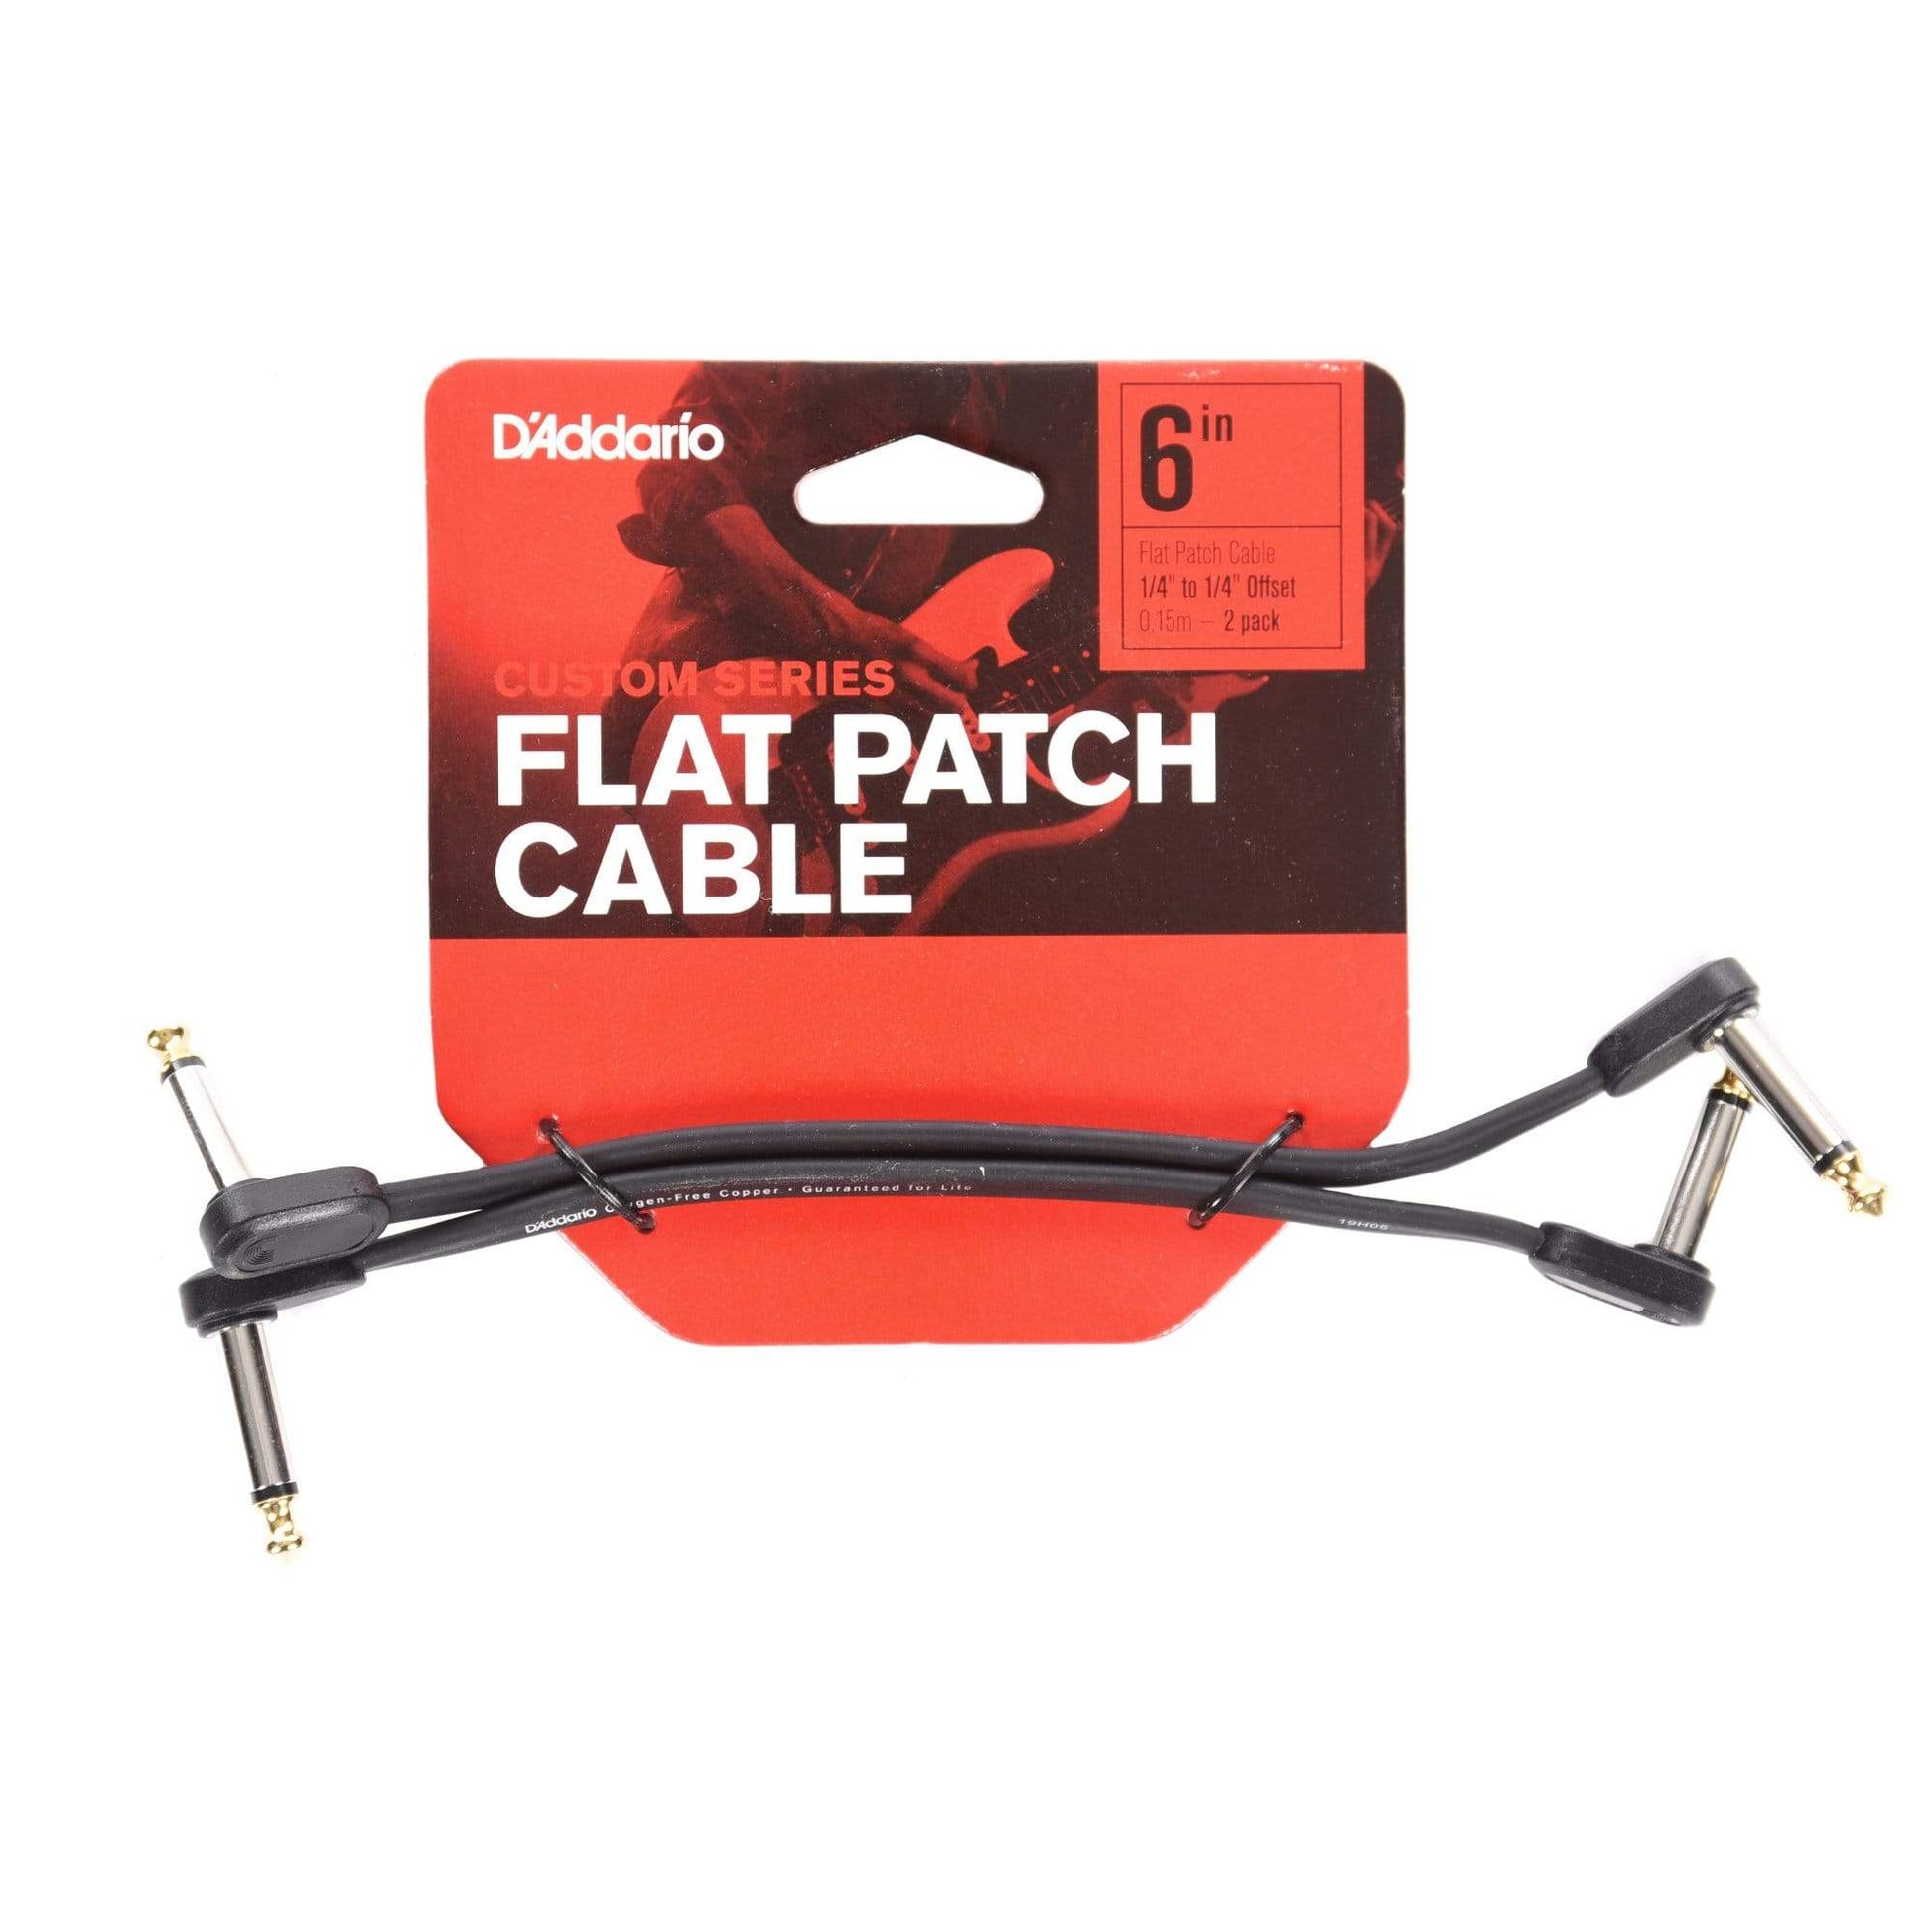 D'Addario Flat Patch Cable 6" Offset Right Angle Twin Pack Accessories / Cables